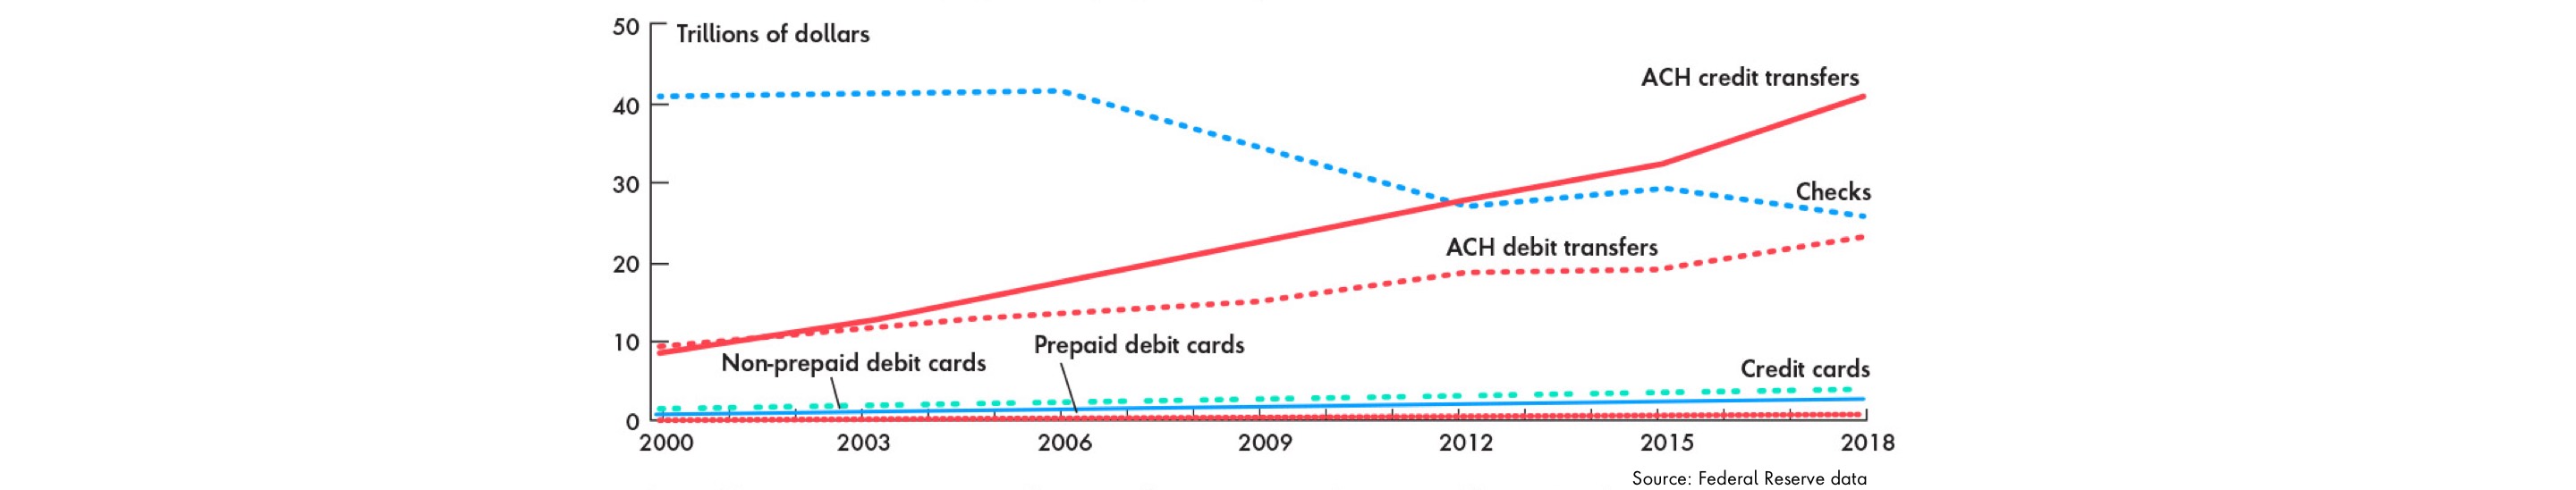 Graph showing an increase in ACH credit and debit transfers, a decrease in checks, and relatively little change in the use of credit and debit cards from 2000-2018, estimated on a triennial basis.